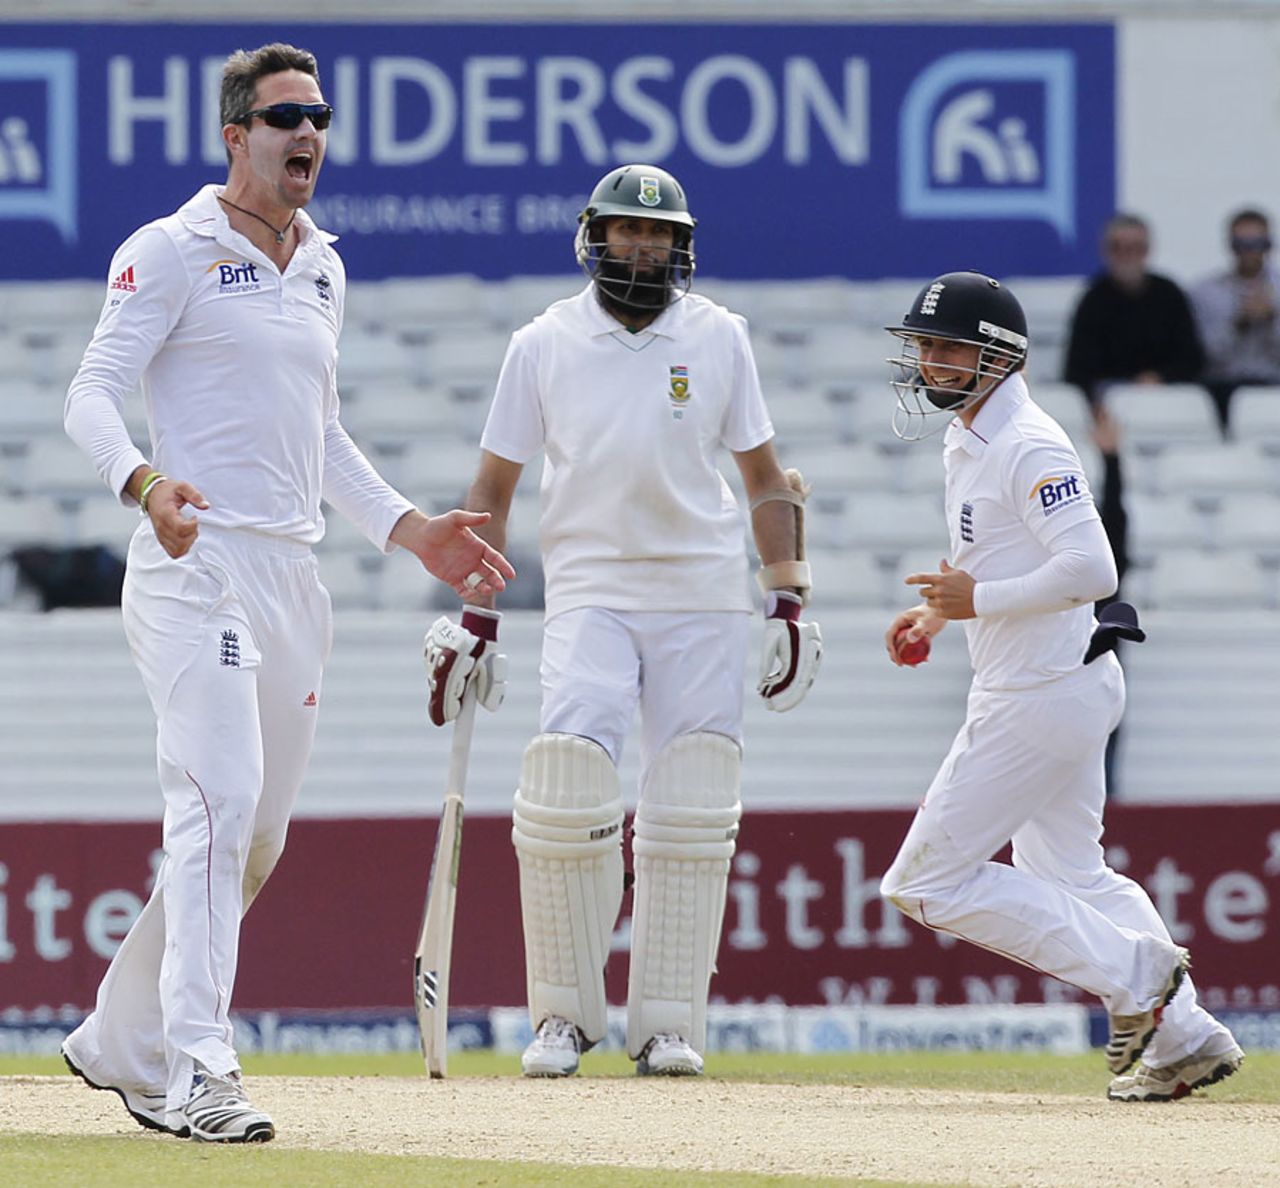 Kevin Pietersen enjoys the wicket of Graeme Smith, England v South Africa, 2nd Investec Test, Headingley, 5th day, August 6, 2012